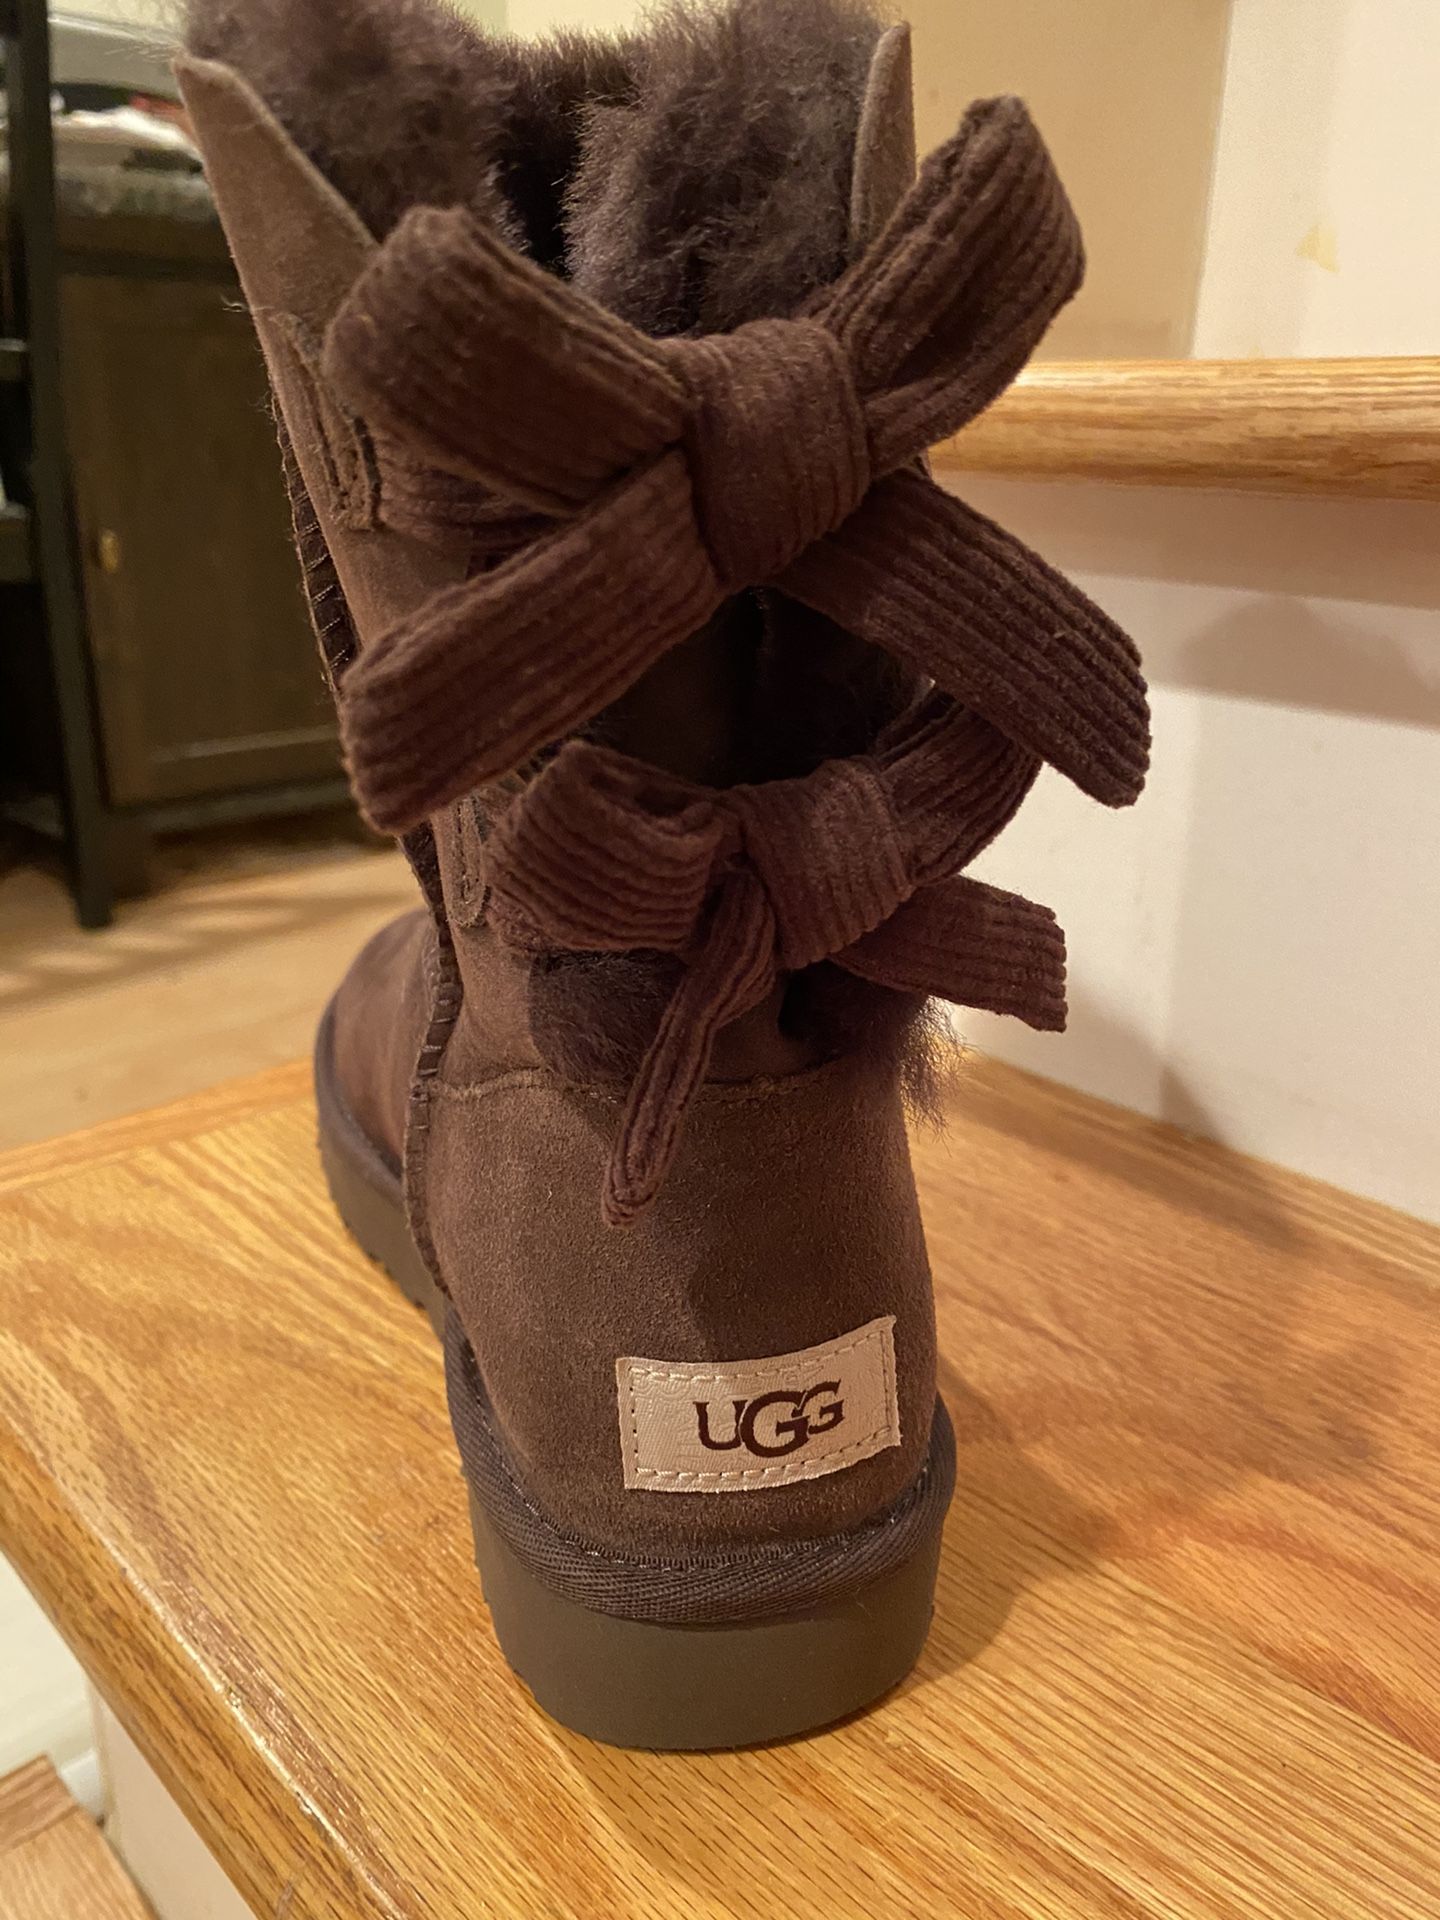 Ugg boots New never worn Size 6